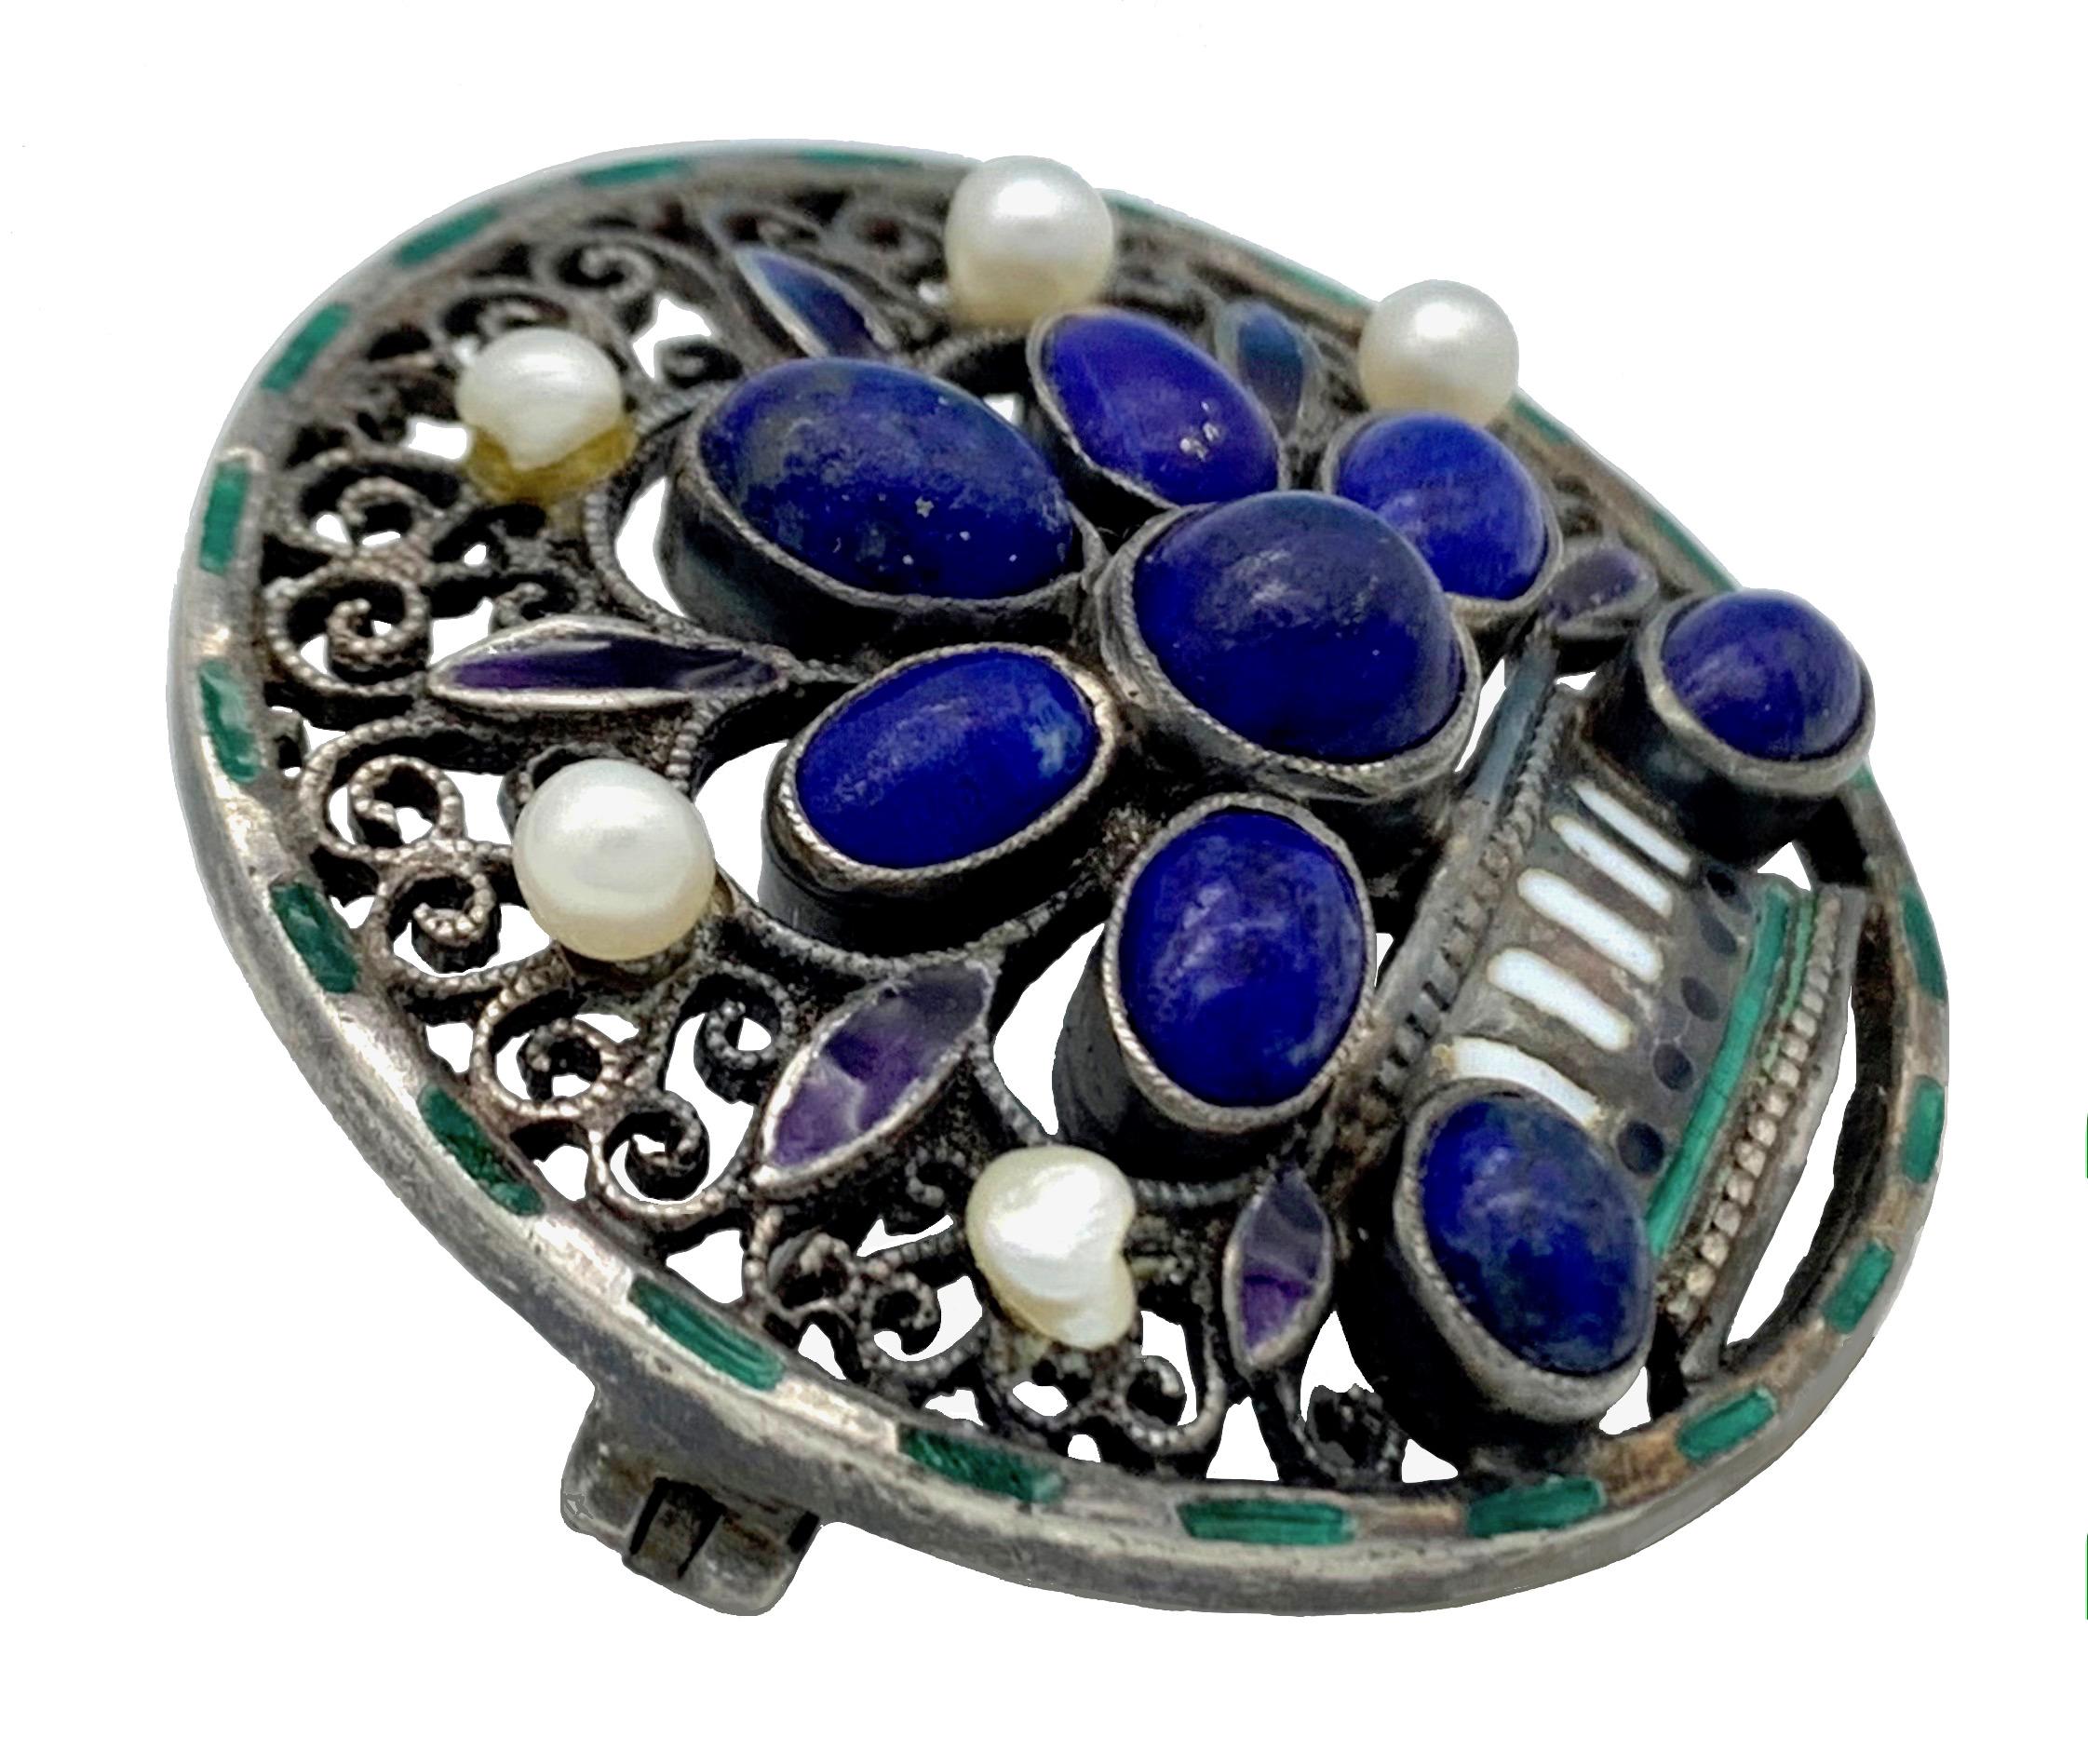  This brooch is identical to the one published in the catalogue accompaning the exhibition  'Schmuck zwischen Avantgarde und Tradition' on page 134, no 1.18a published by the Arnoldsche Verlagsanstalt, 1990. The published Brooch is in the